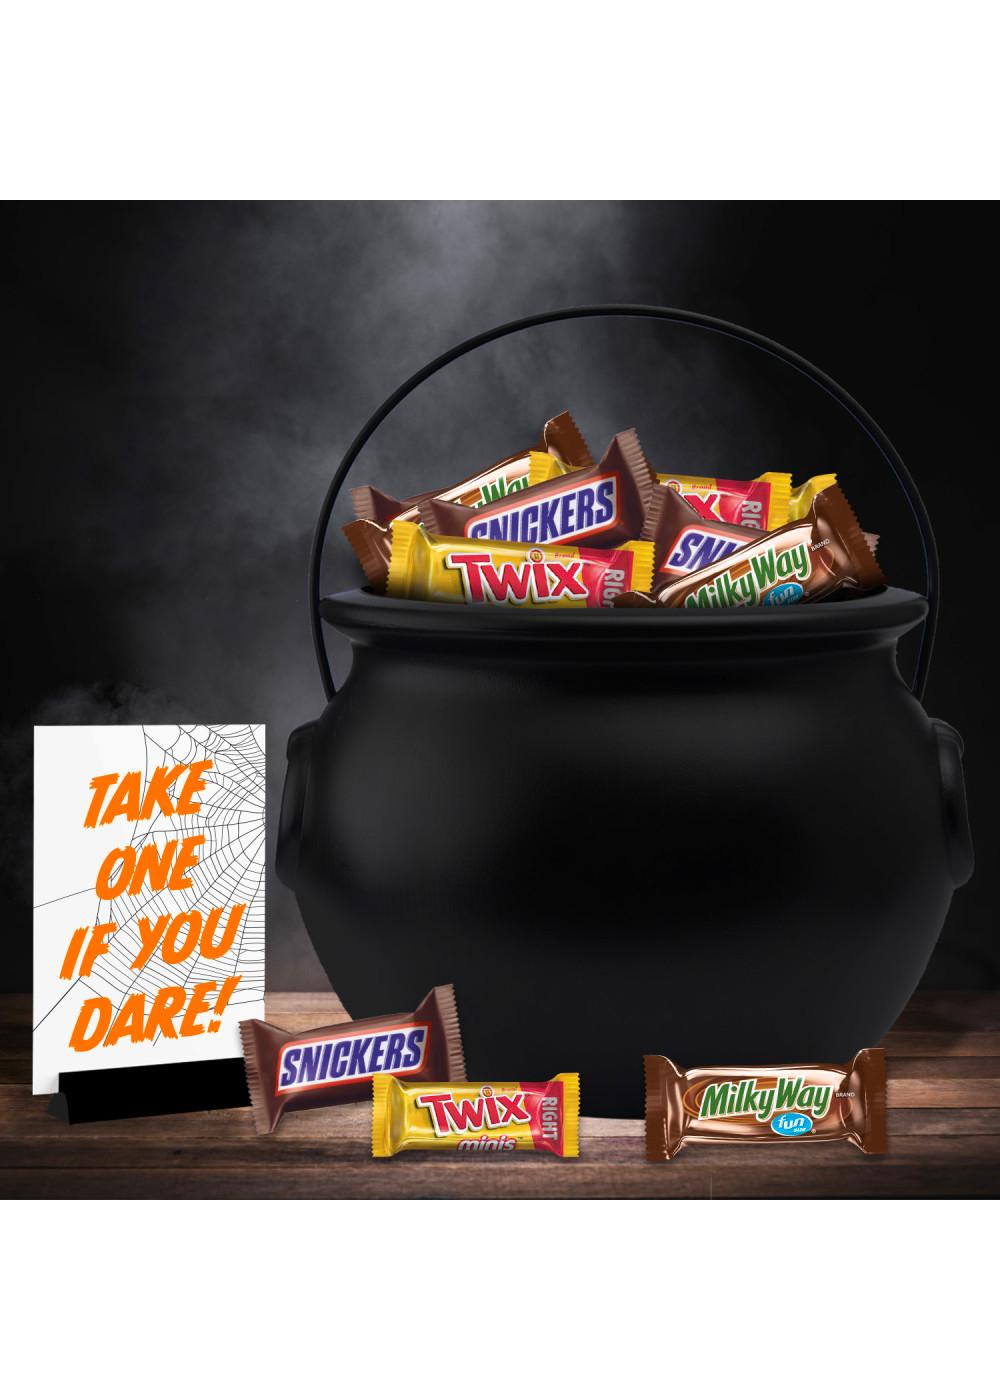 Snickers, Twix & Milky Way Assoted Fun Size Halloween Candy Bars; image 7 of 7